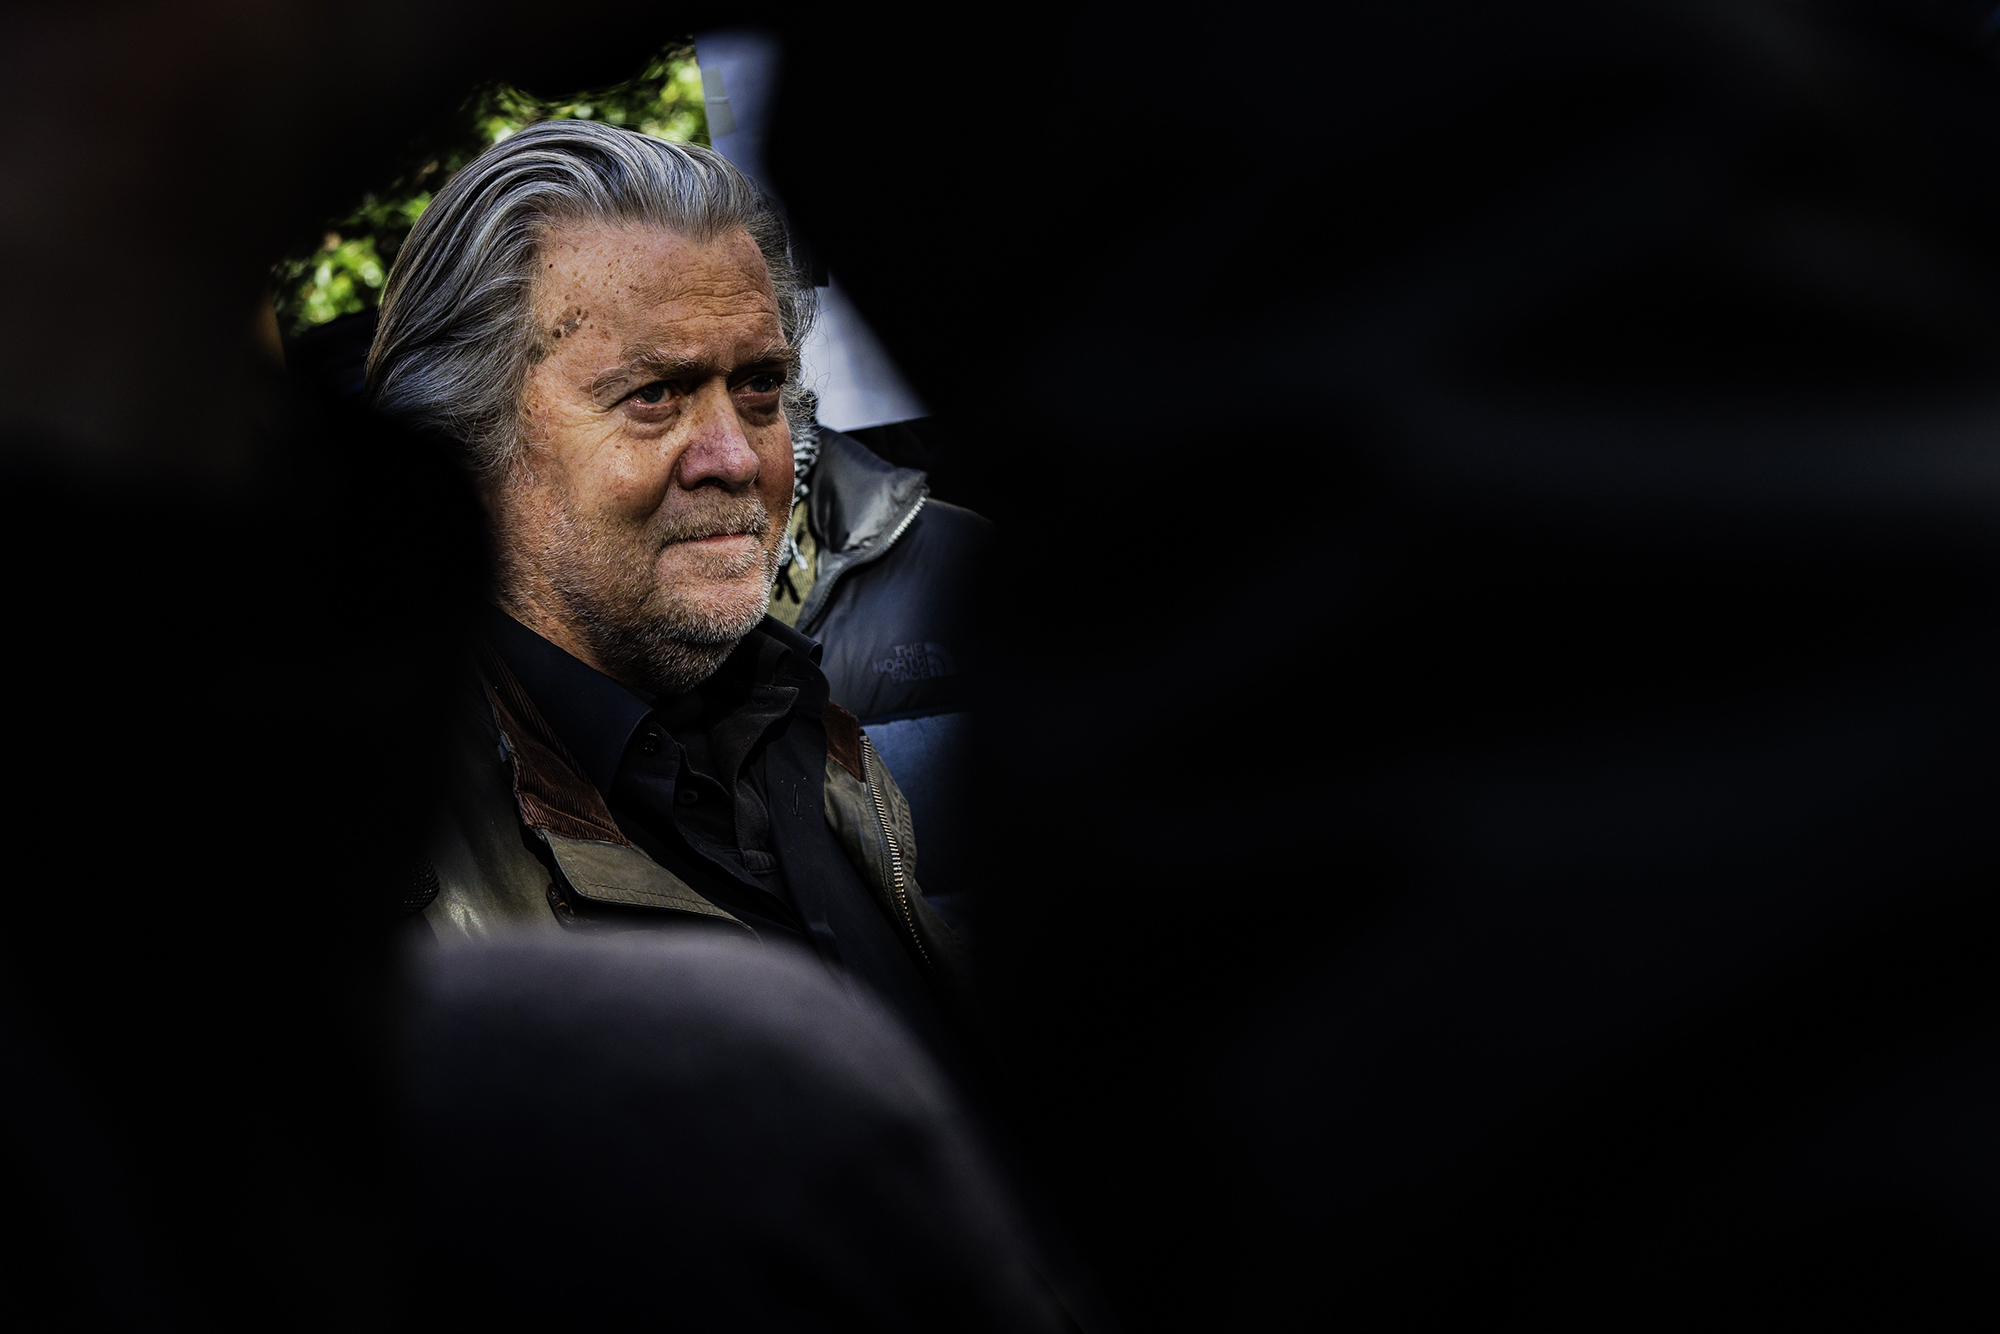 PHOTO: Steve Bannon, former adviser to Donald Trump, speaks to members of the media after appearing in federal court in Washington, Nov. 15, 2021.